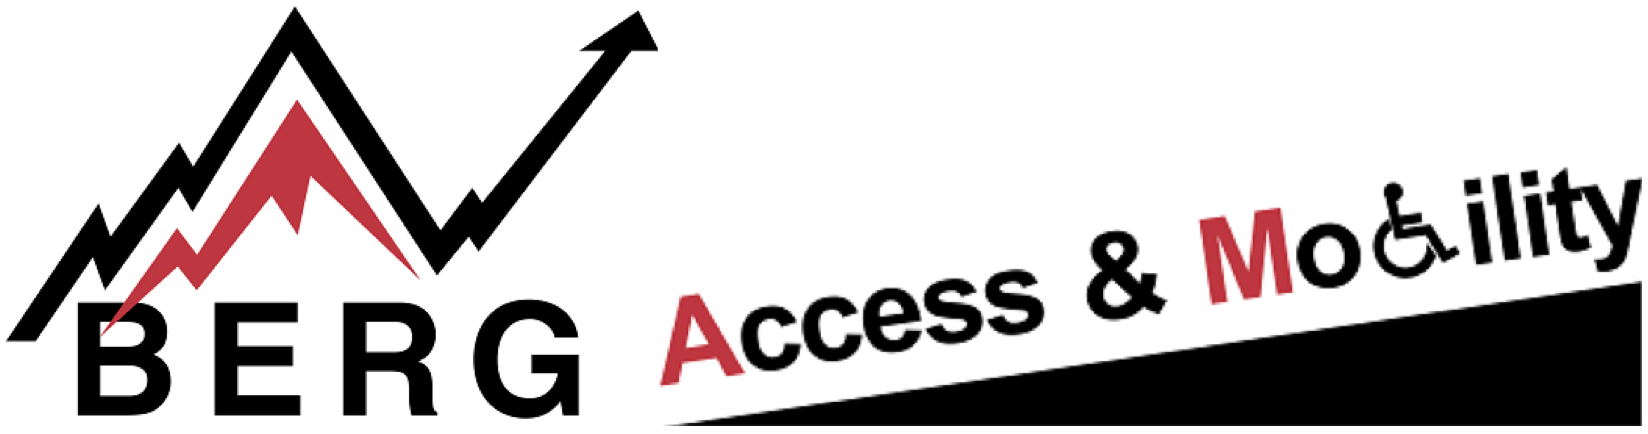 BERG Access & Mobility